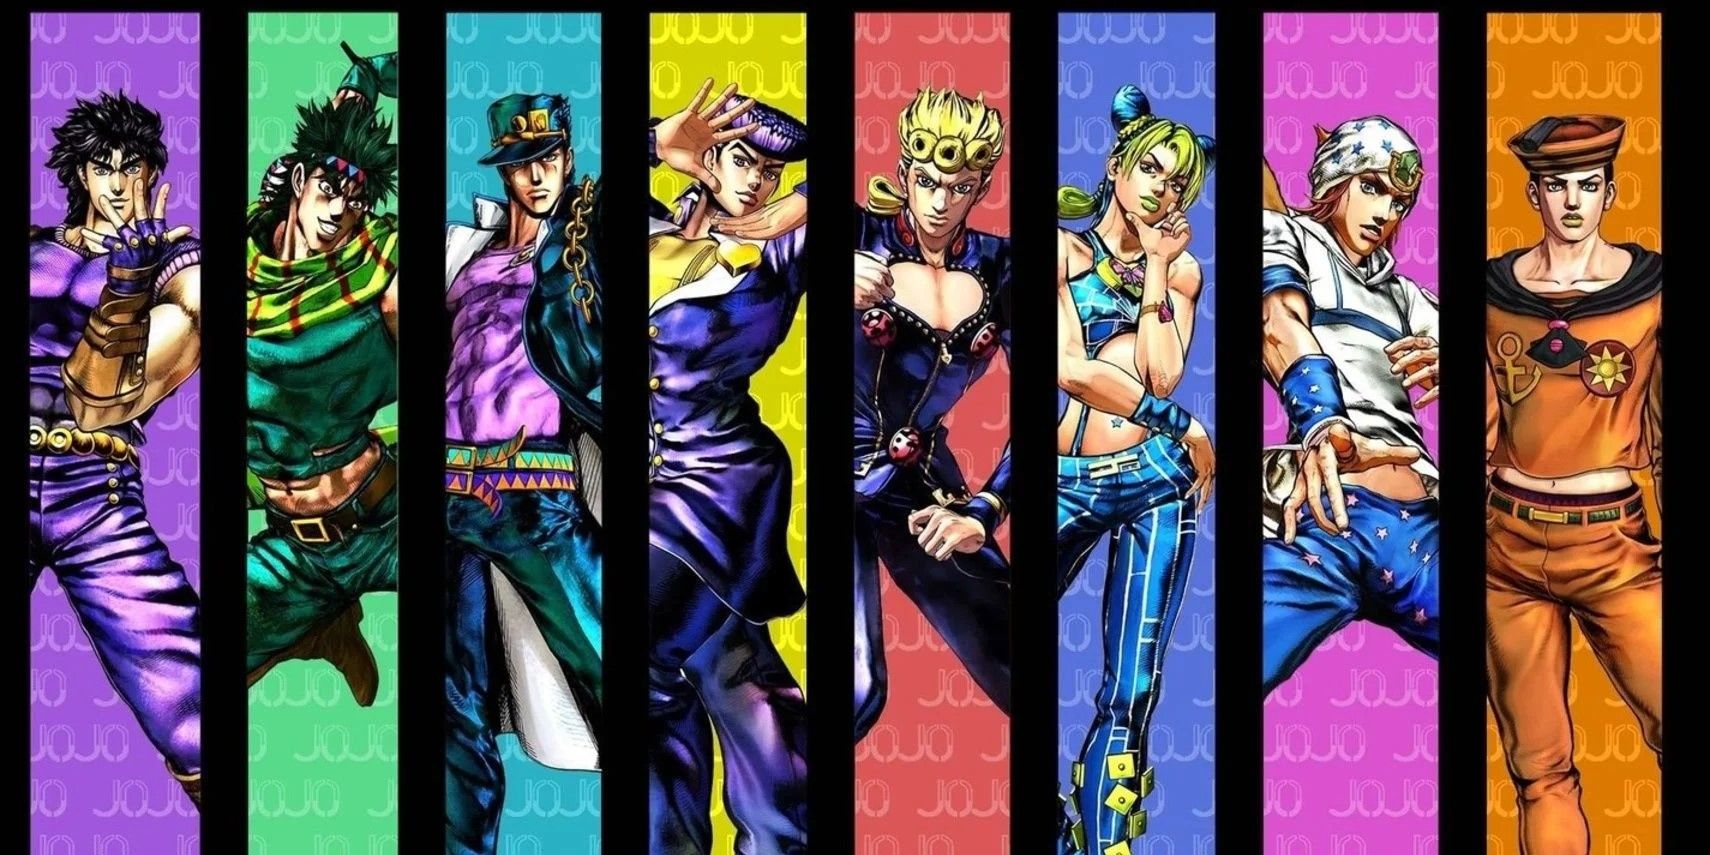 All the Jojo characters from 6 parts in one picture